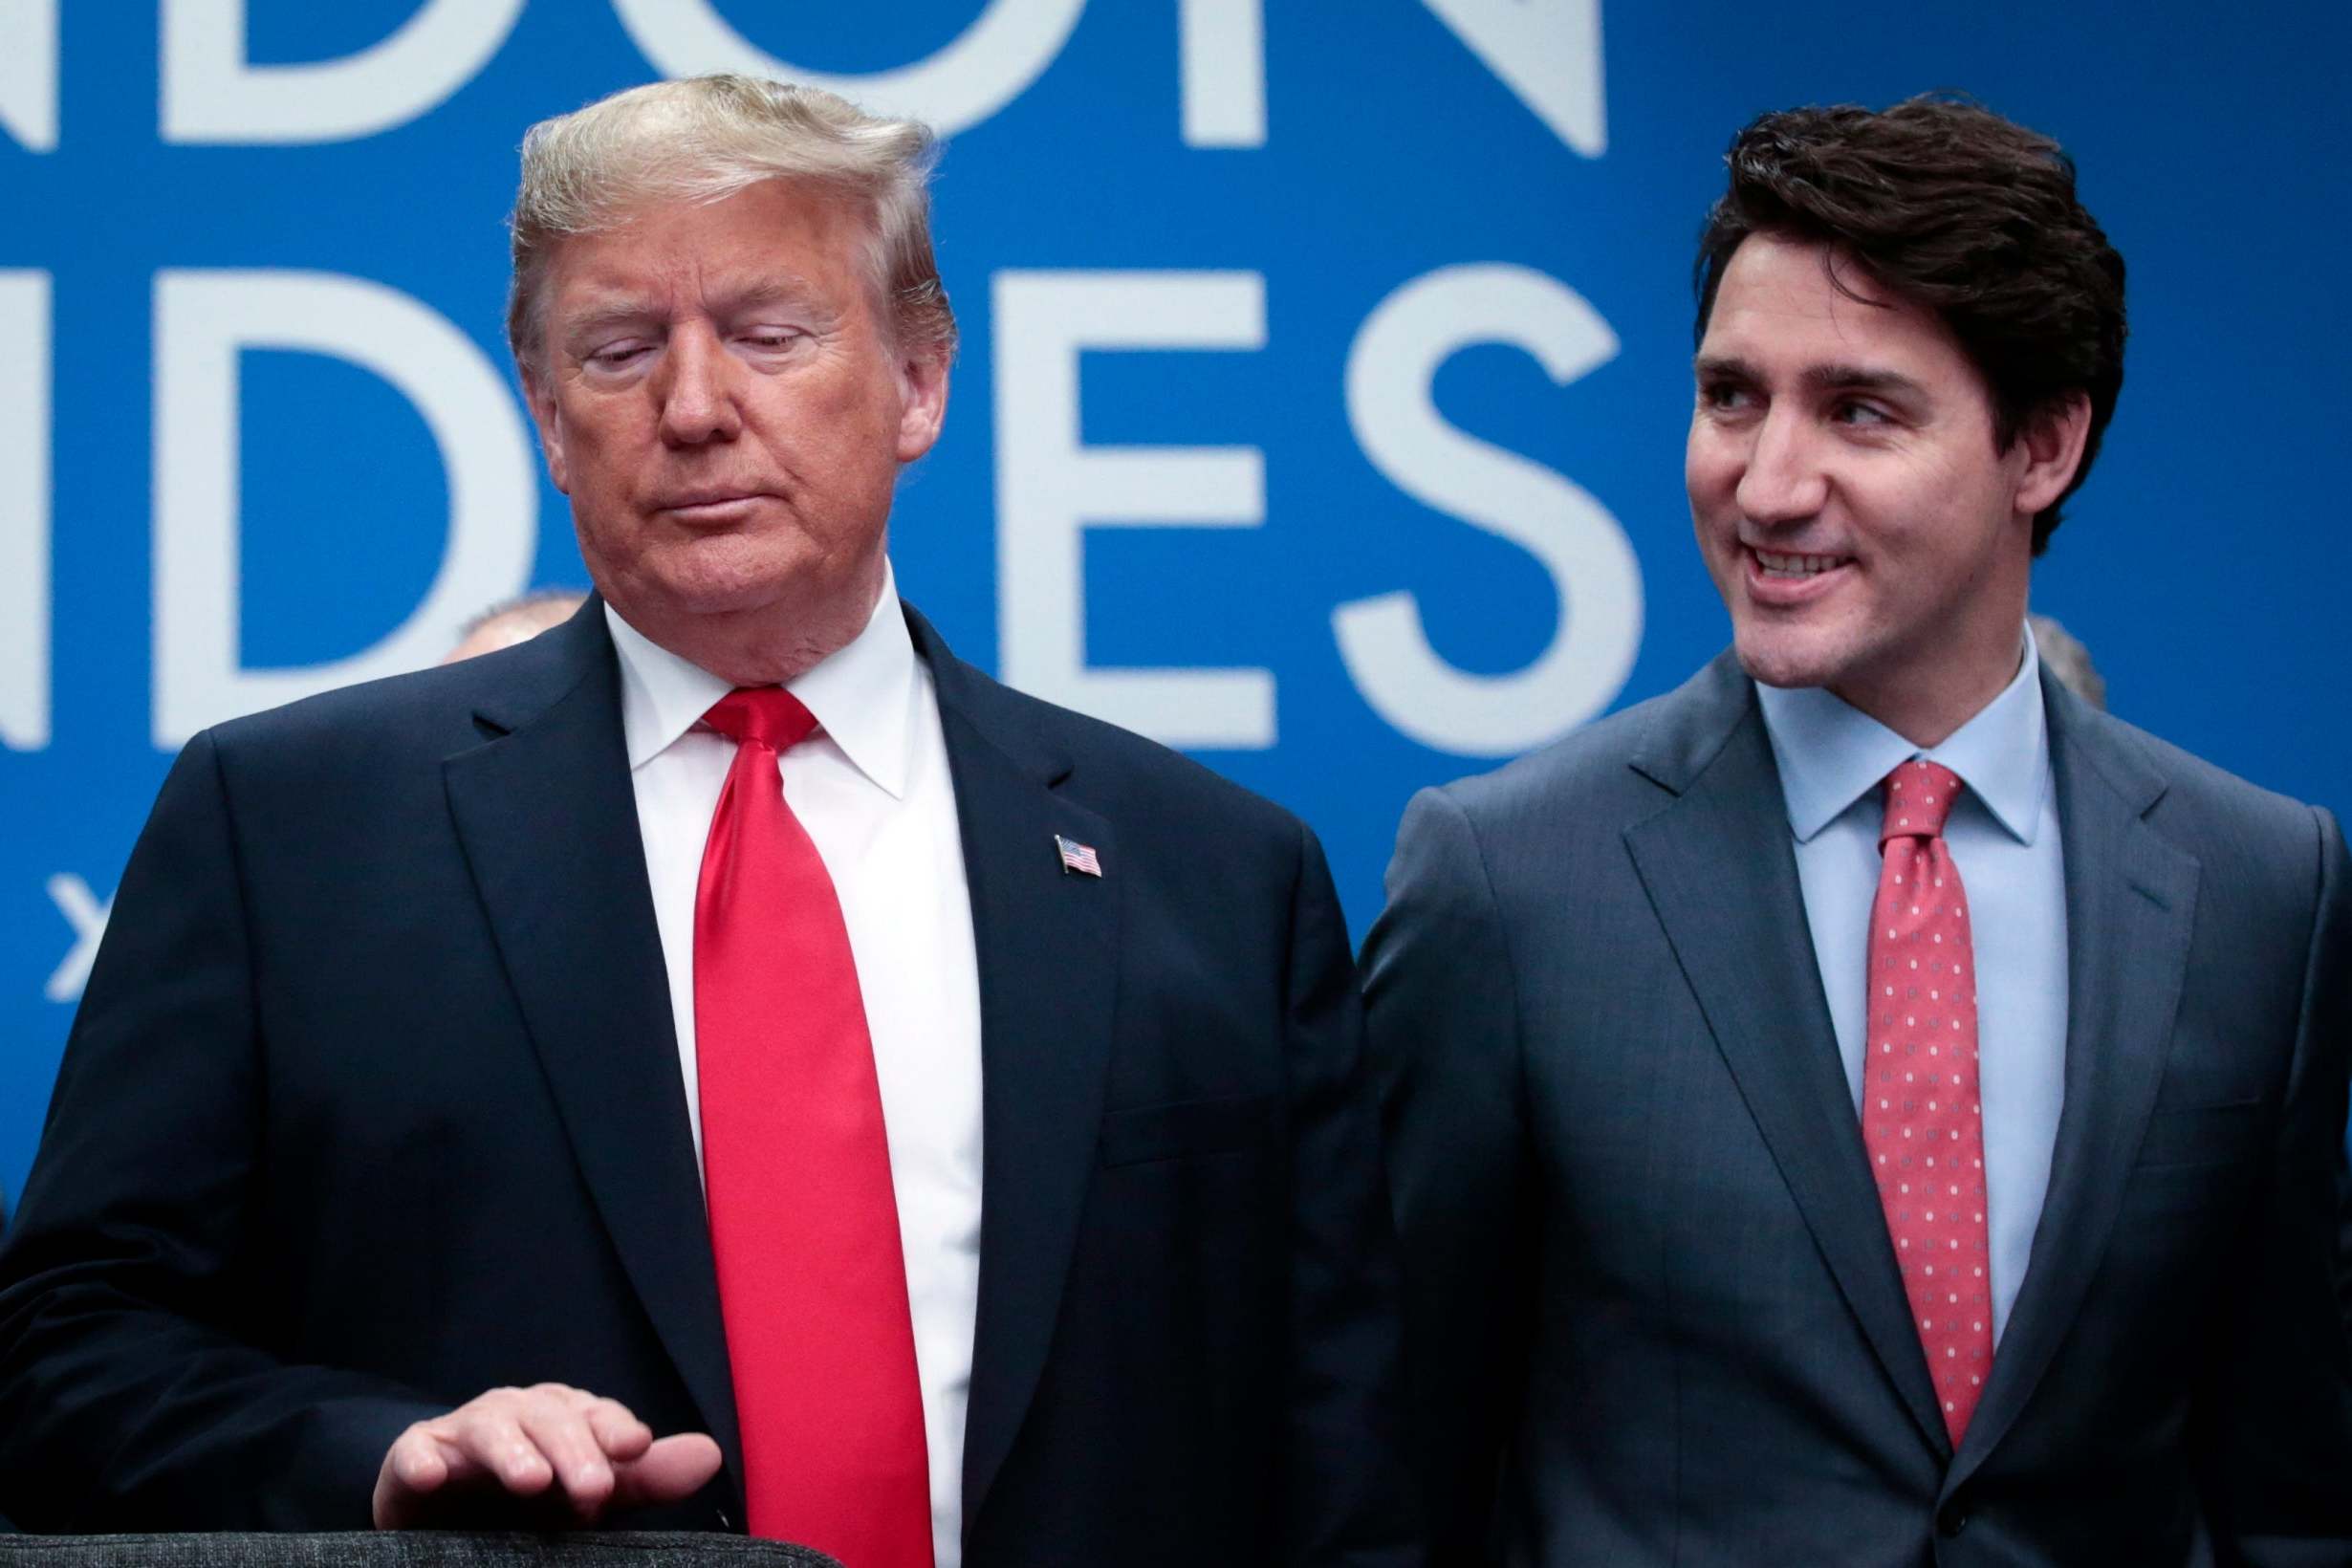 Trudeau had rocky relations with Trump during his first four-year White House term